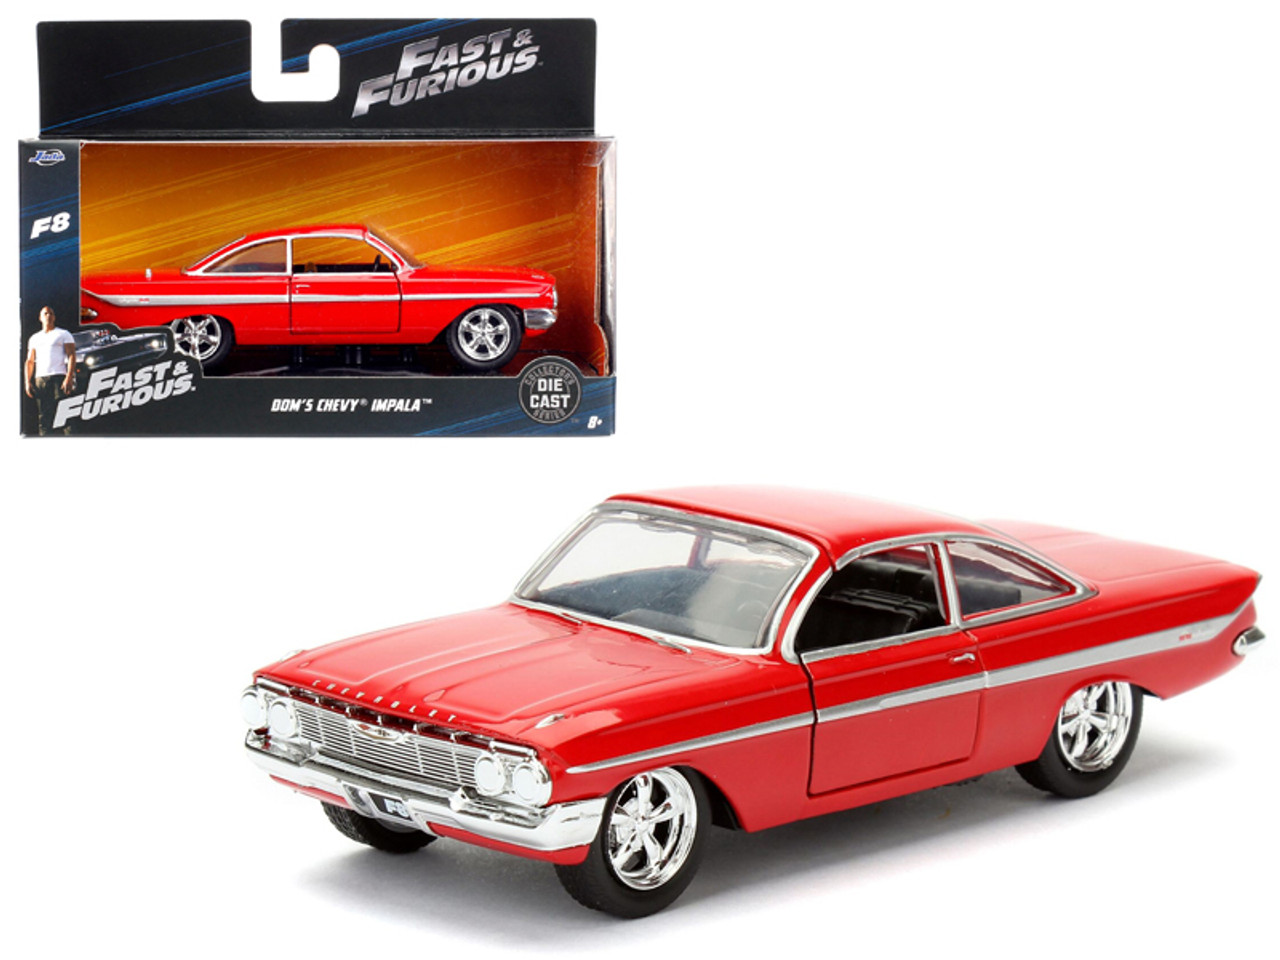 Dom's Chevrolet Impala Red Fast & Furious F8 "The Fate of the Furious" Movie 1/32 Diecast Model Car by Jada